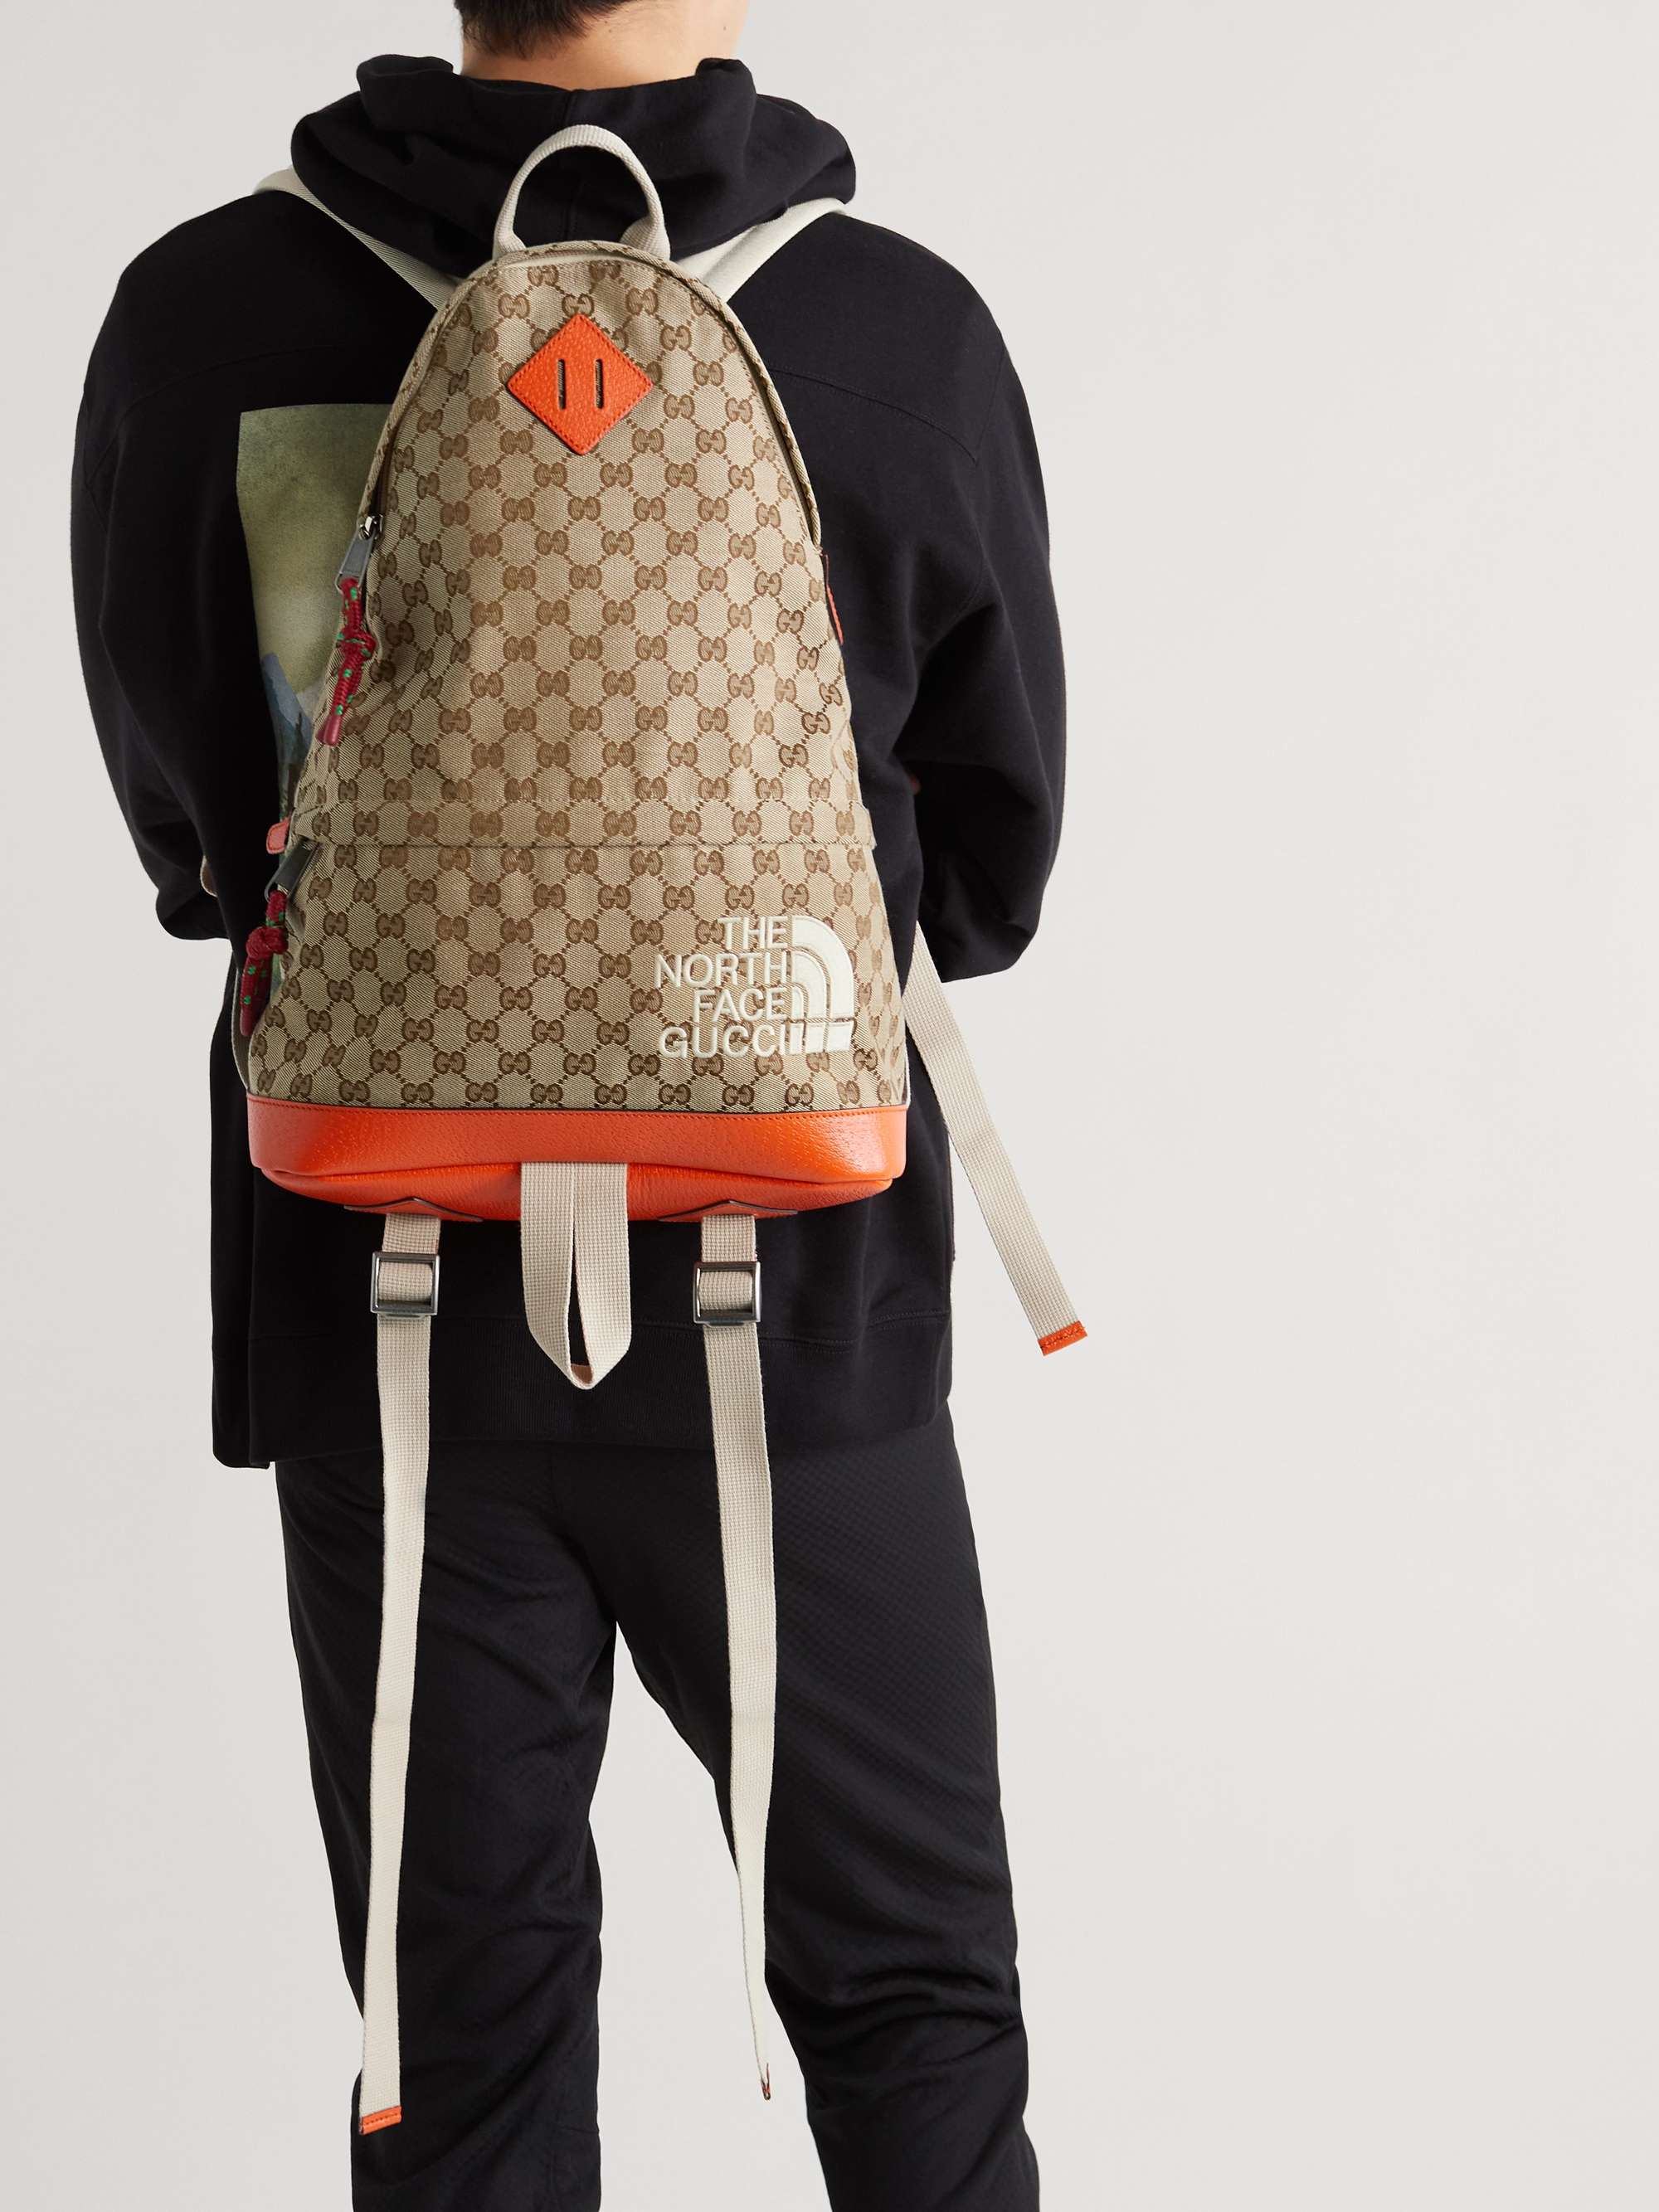 GUCCI + The North Face Leather-Trimmed Monogrammed Canvas Backpack